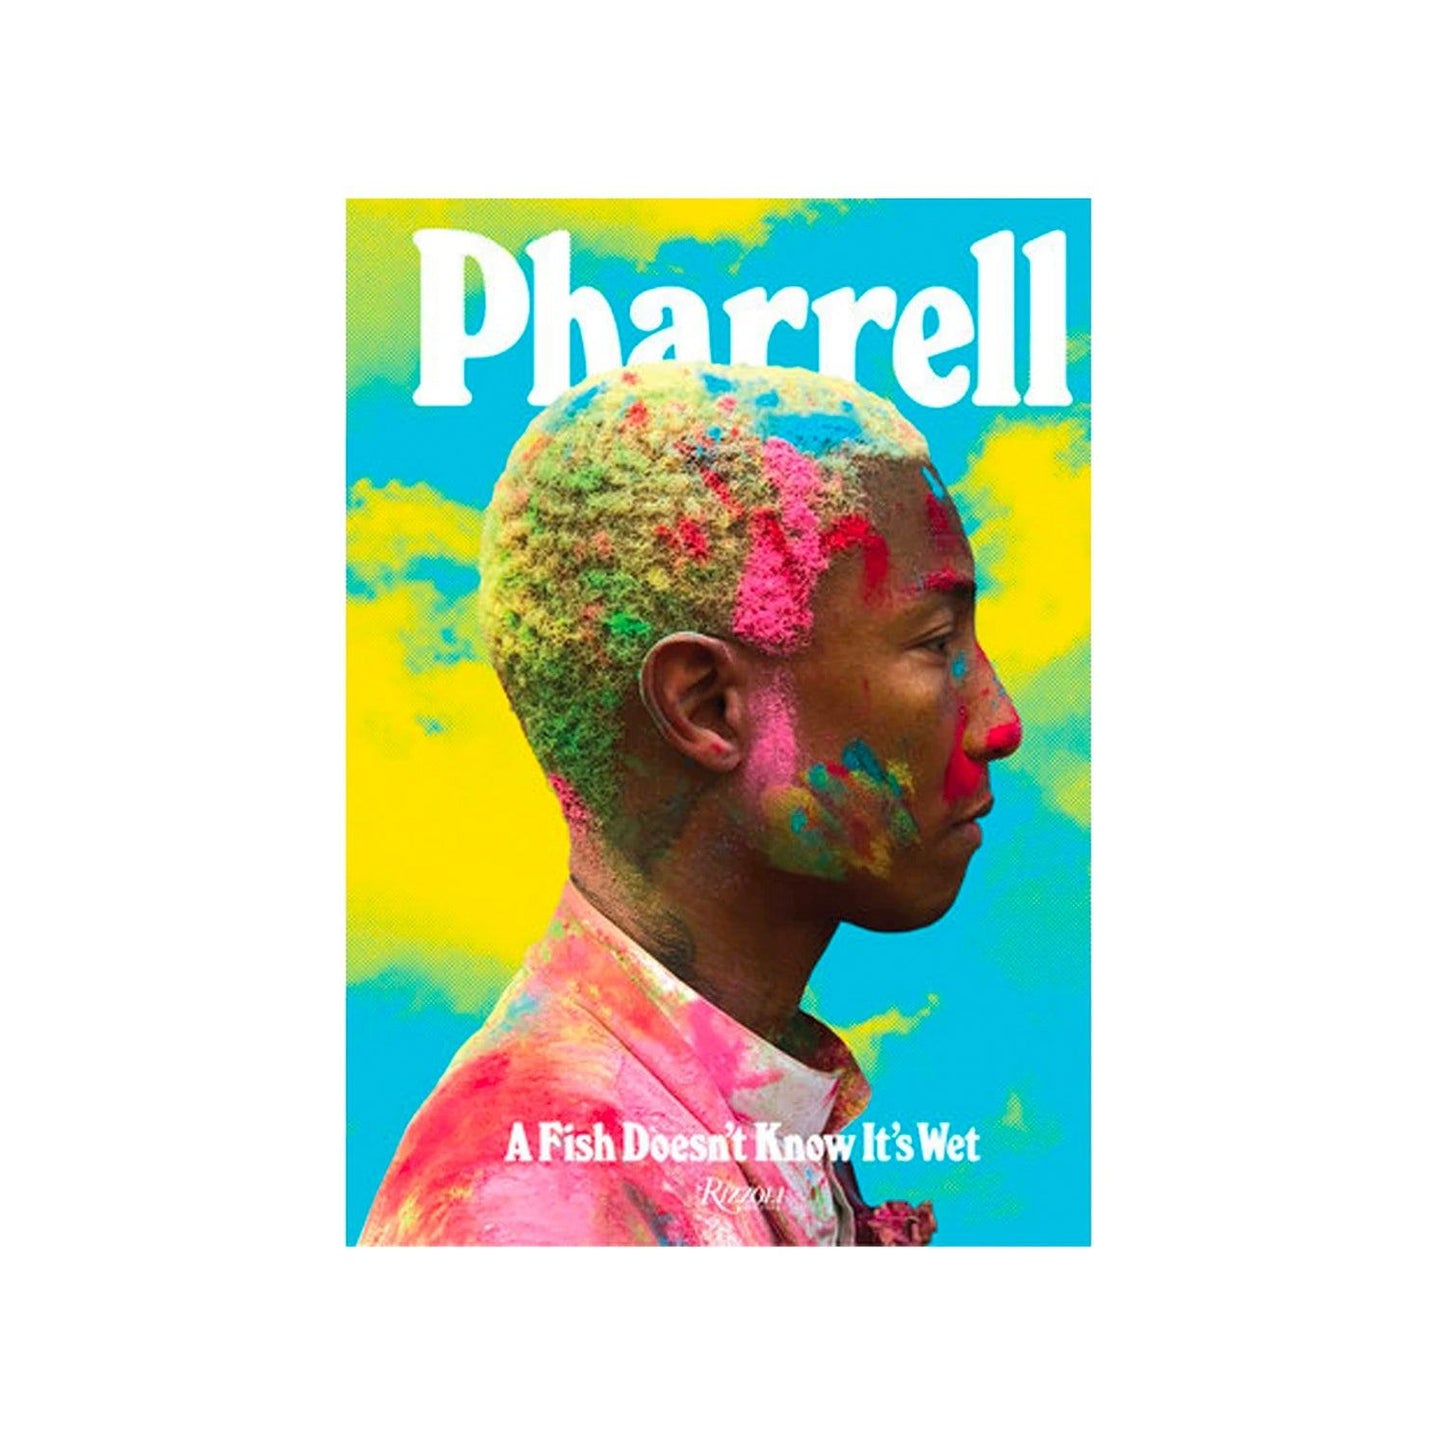 Pharrell: A Fish Doesn't Know It's Wet - Rizzoli